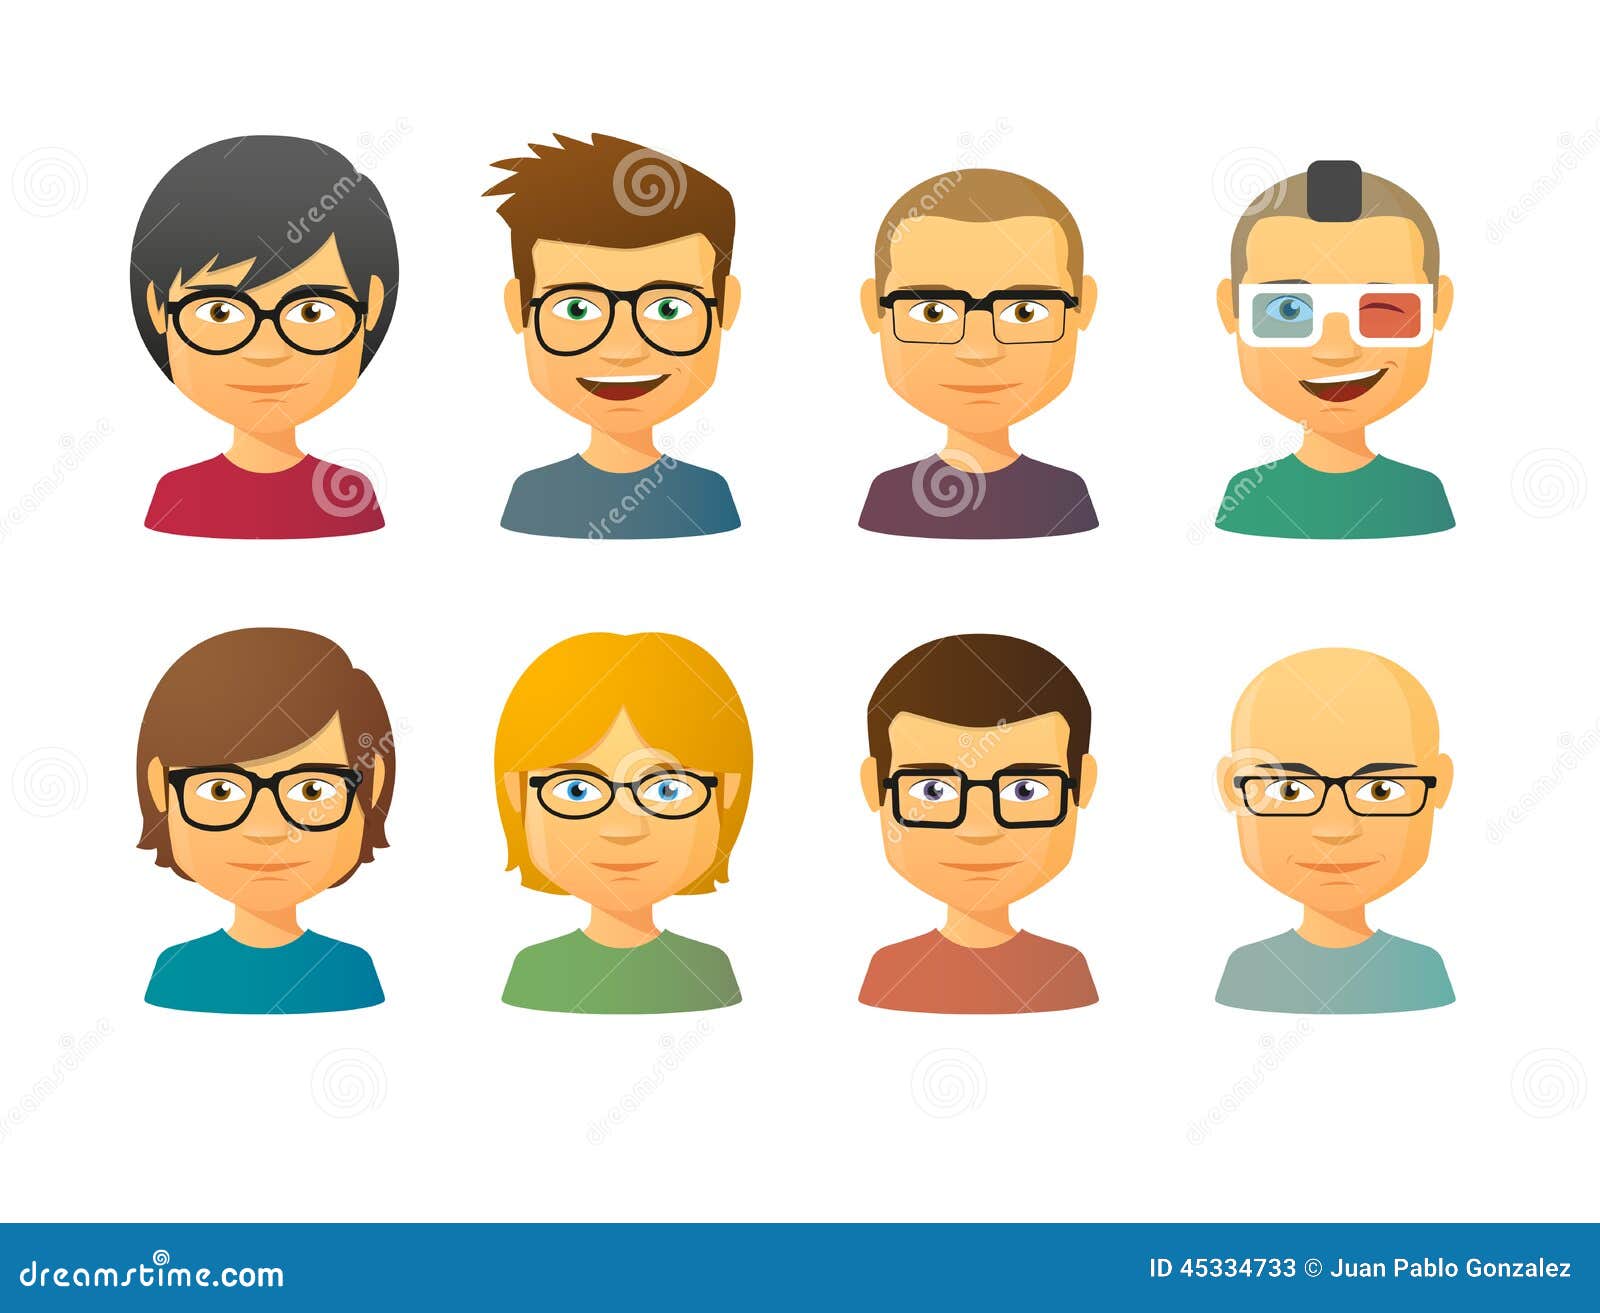 Male Avatars Wearing Glasses With Various Hair Styles